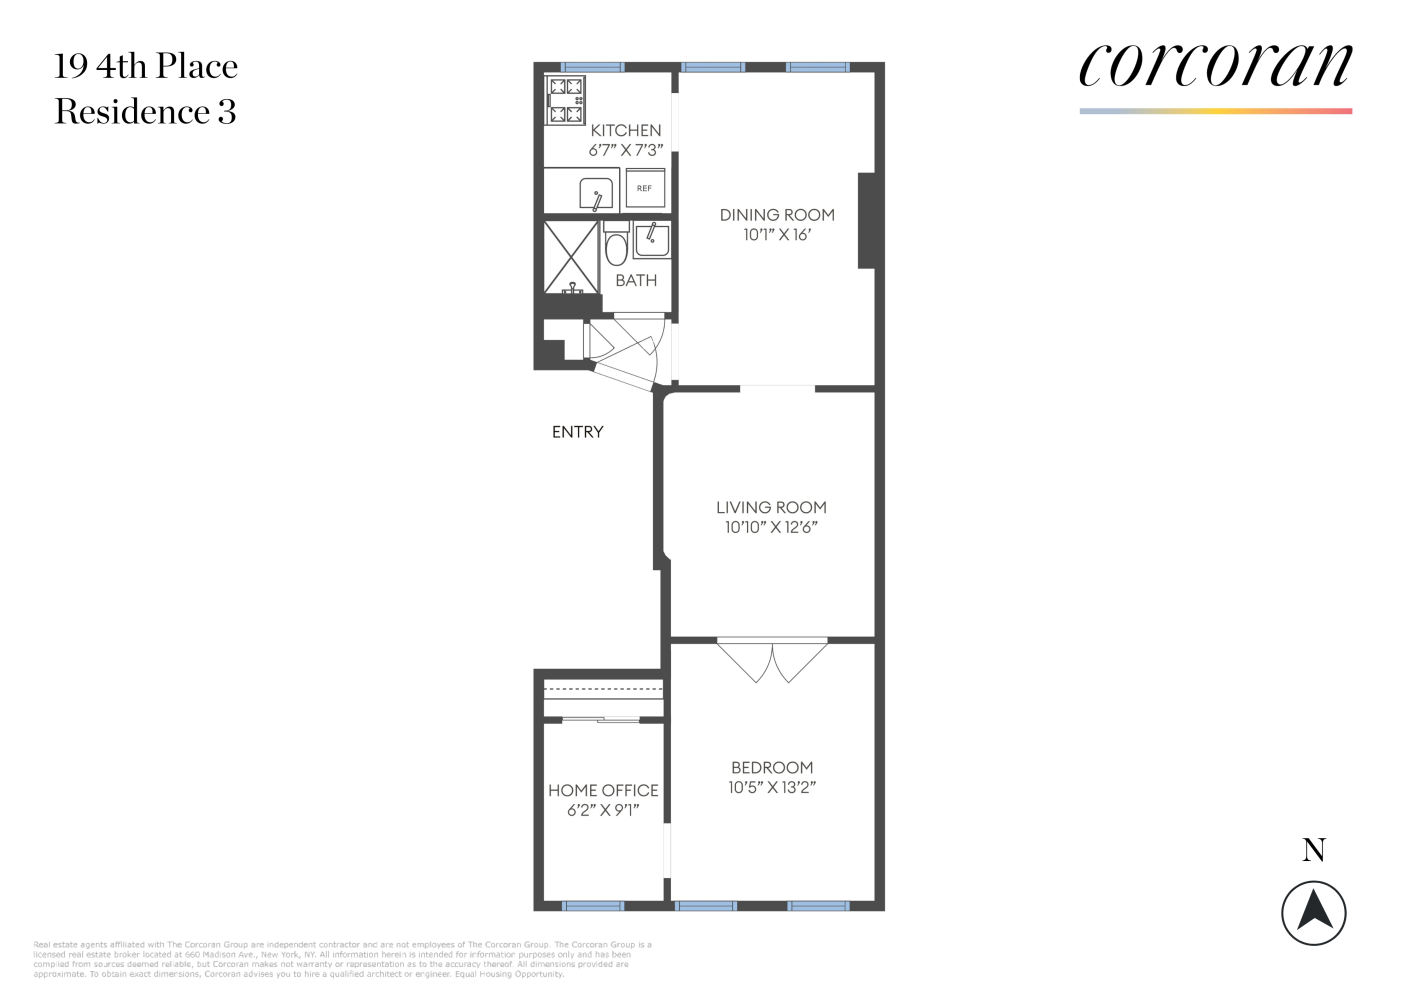 Floorplan for 19 4th Place, 3